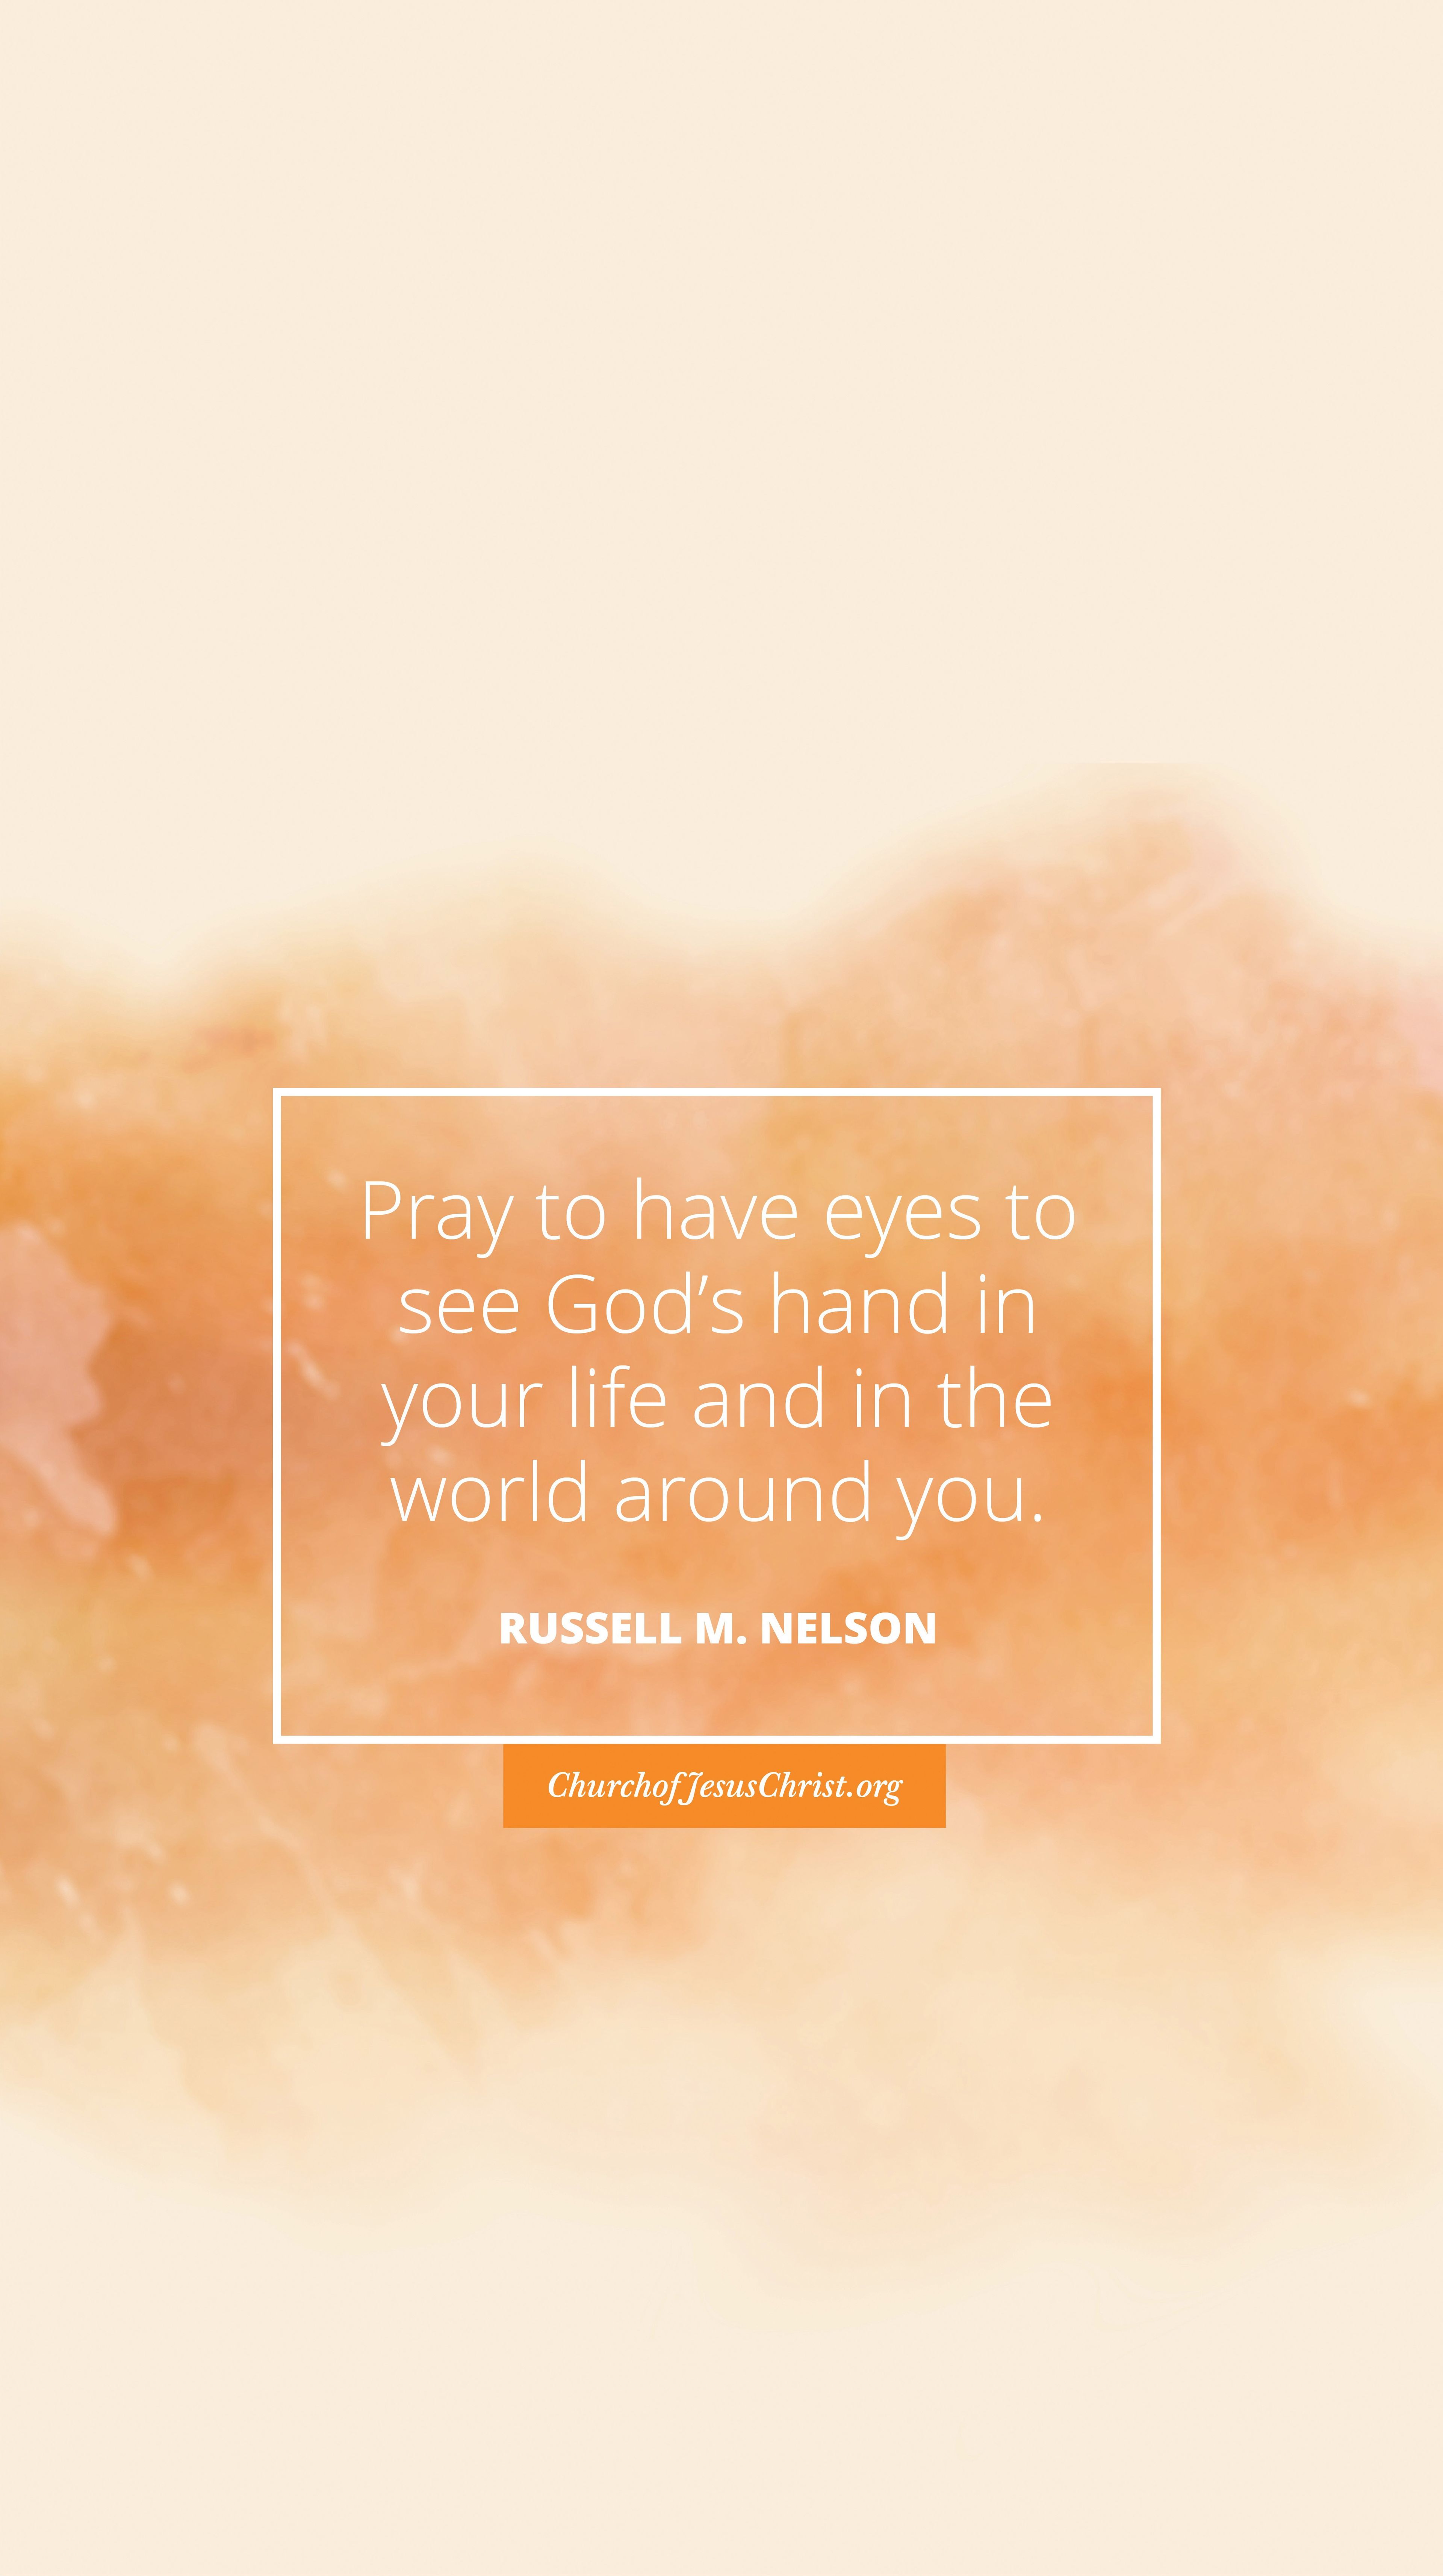 "Pray to have eyes to see God's hand in your life and in the world around you." —Russell M. Nelson